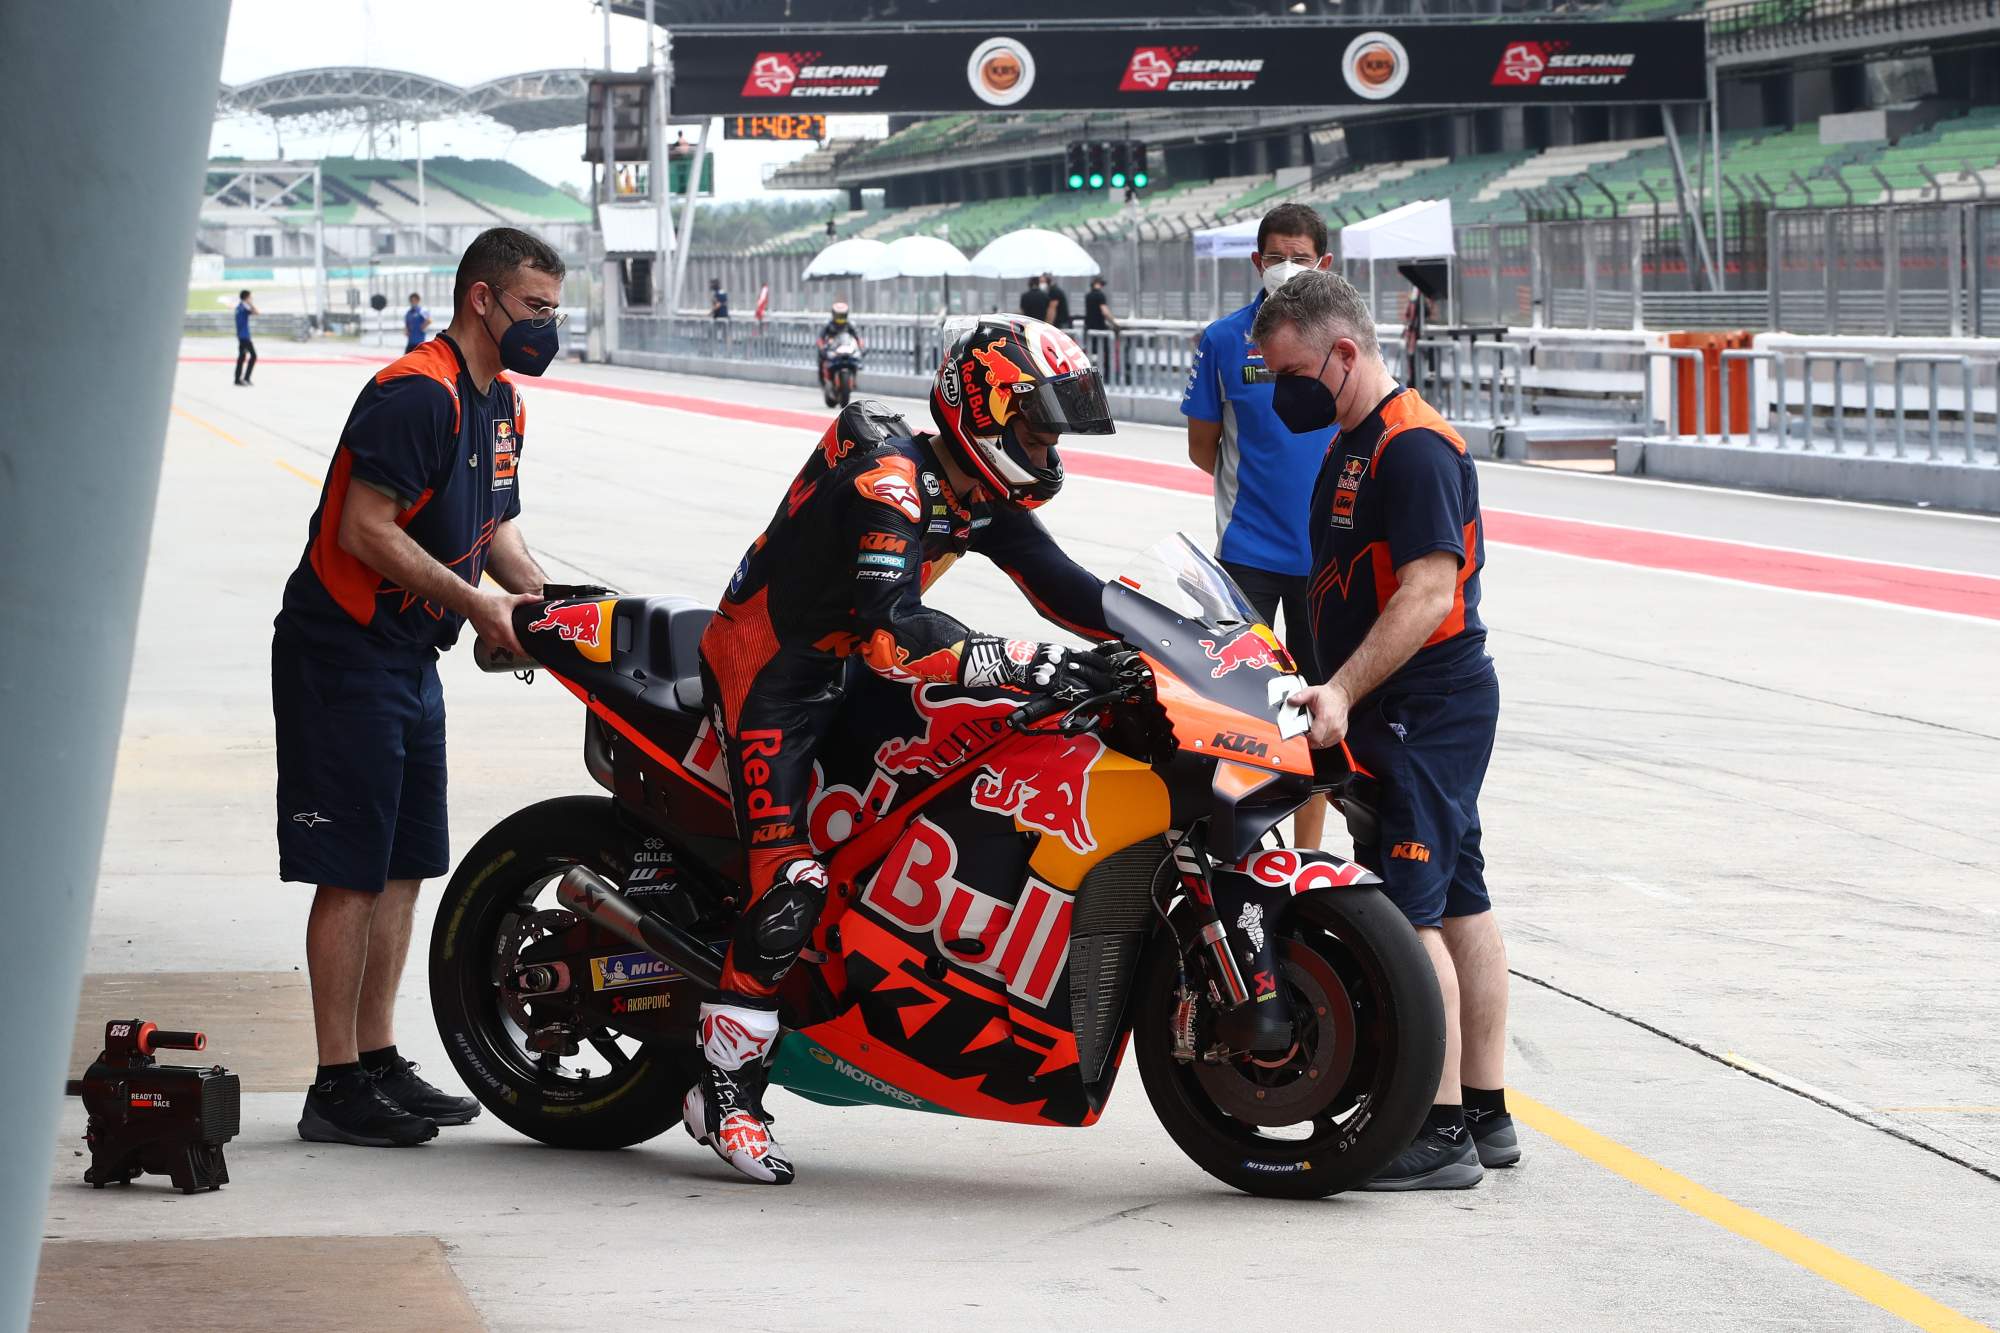 What is it like to be a technician on a motorcycle race team